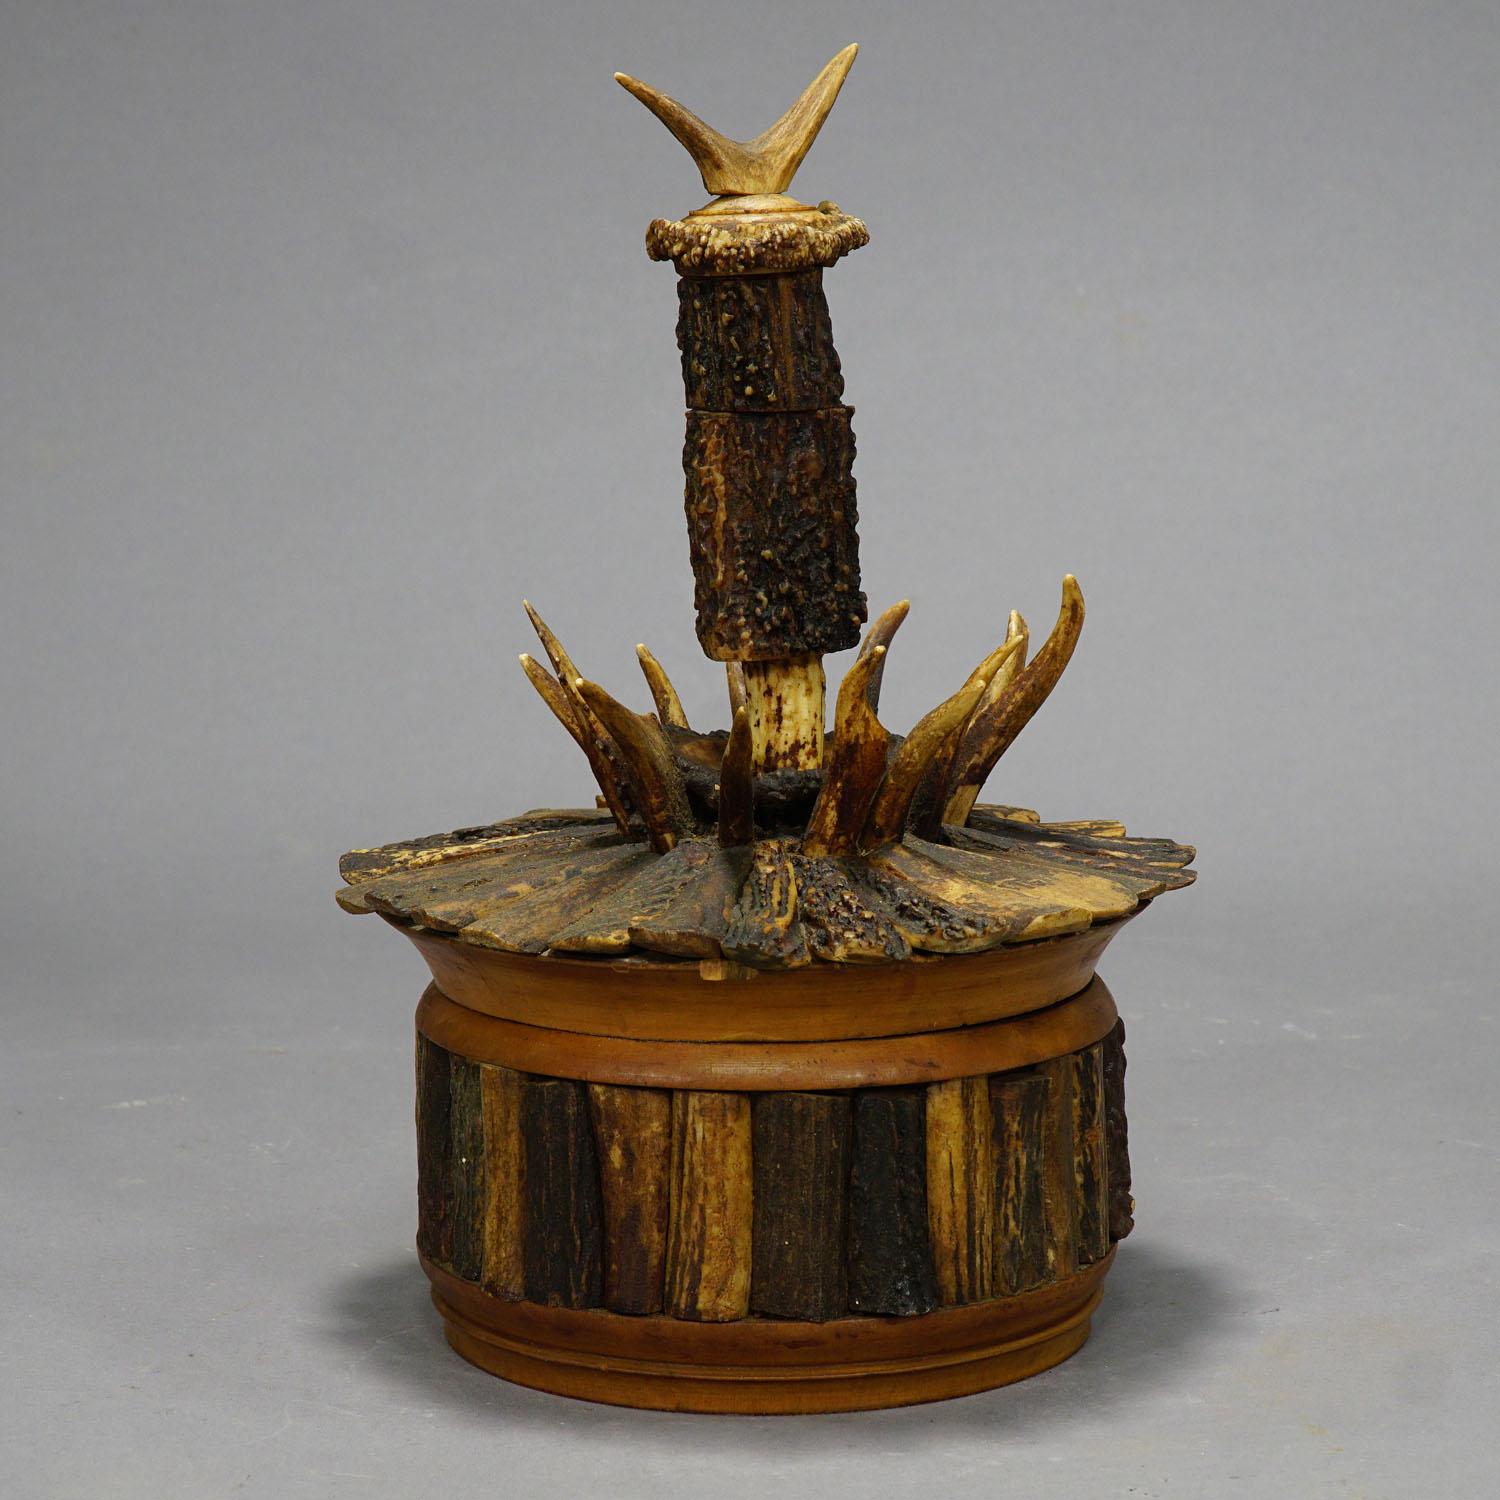 Rare Cabin Decor Antler Humidor, circa 1890-1900

An antique turned wooden box with lid, venered with several fine antler slices from the deer and decorated with tips of roe deer antlers. (woodcrack at the lid - see pictures). On top of the lid with